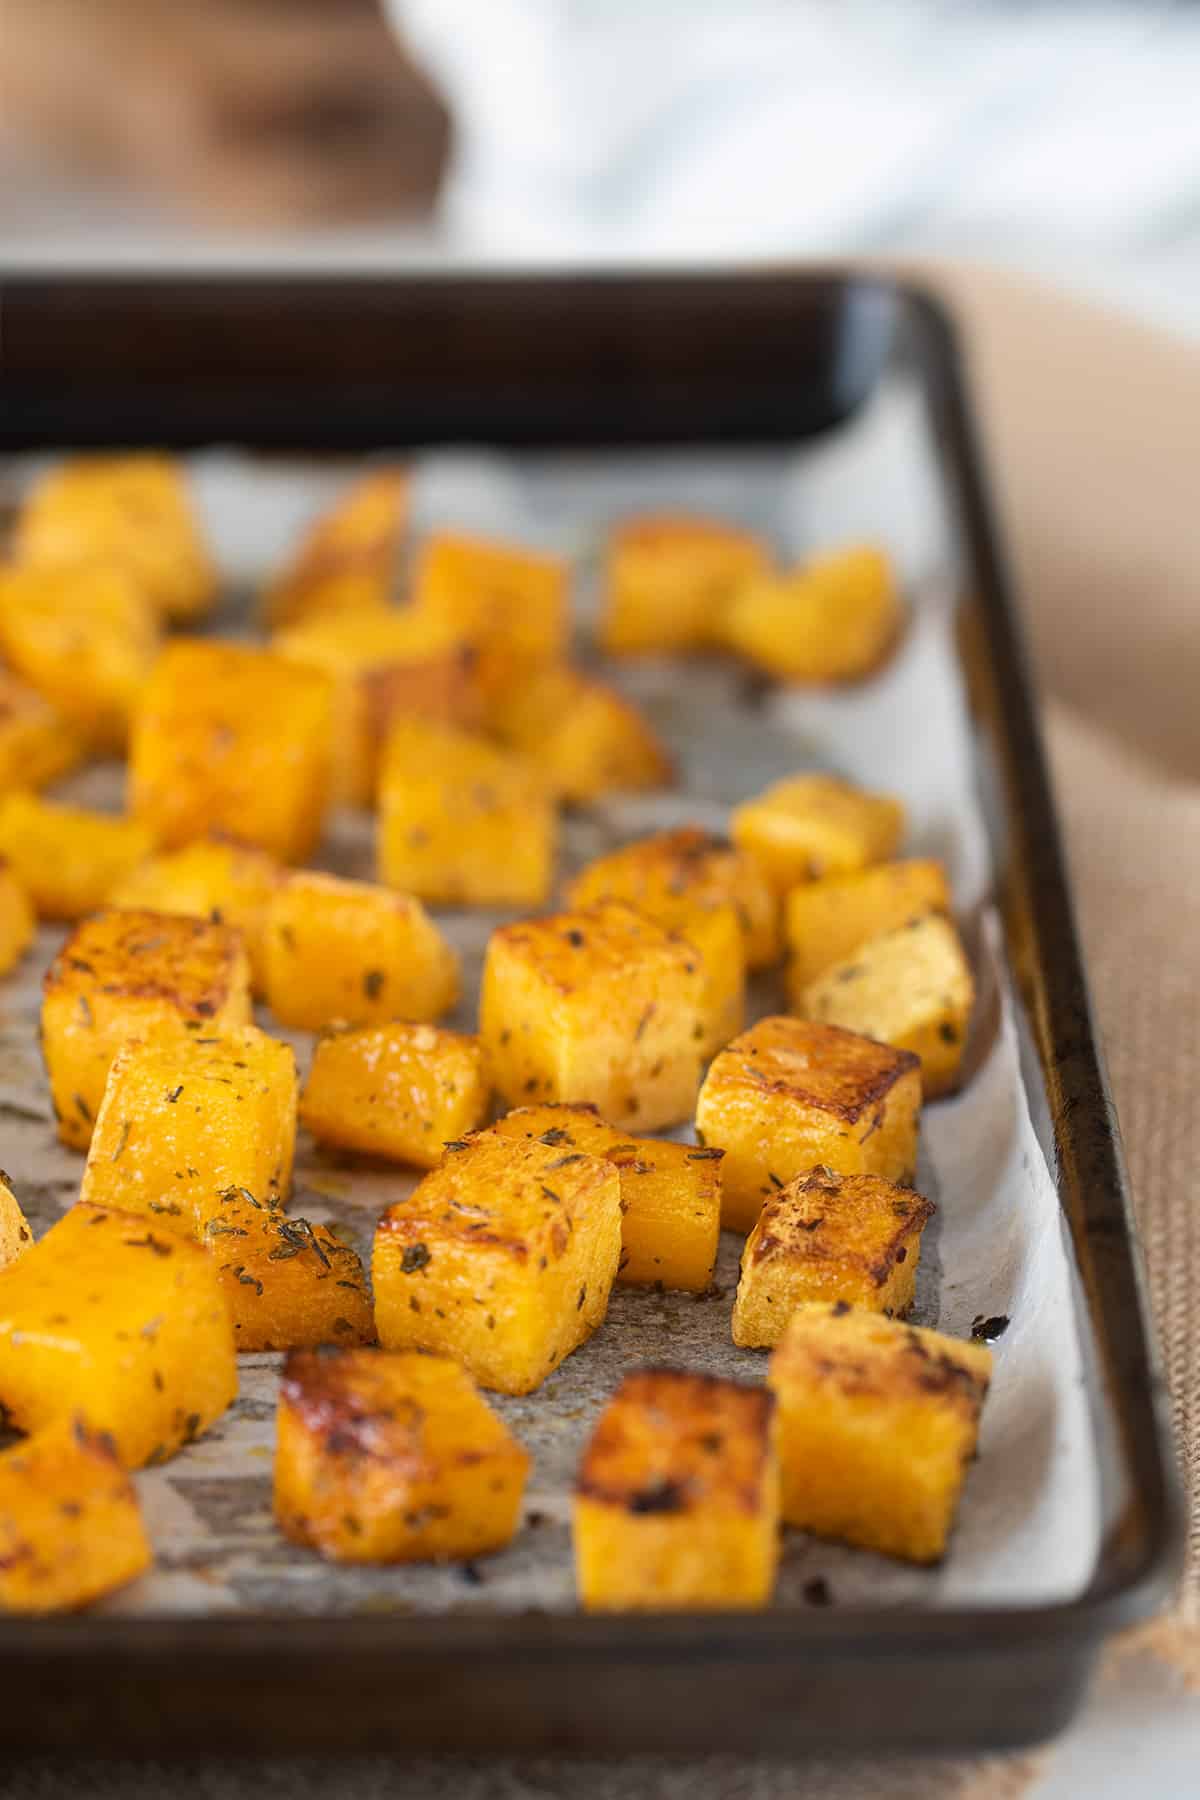 Oven roasted butternut squash on a baking pan with parchment paper.